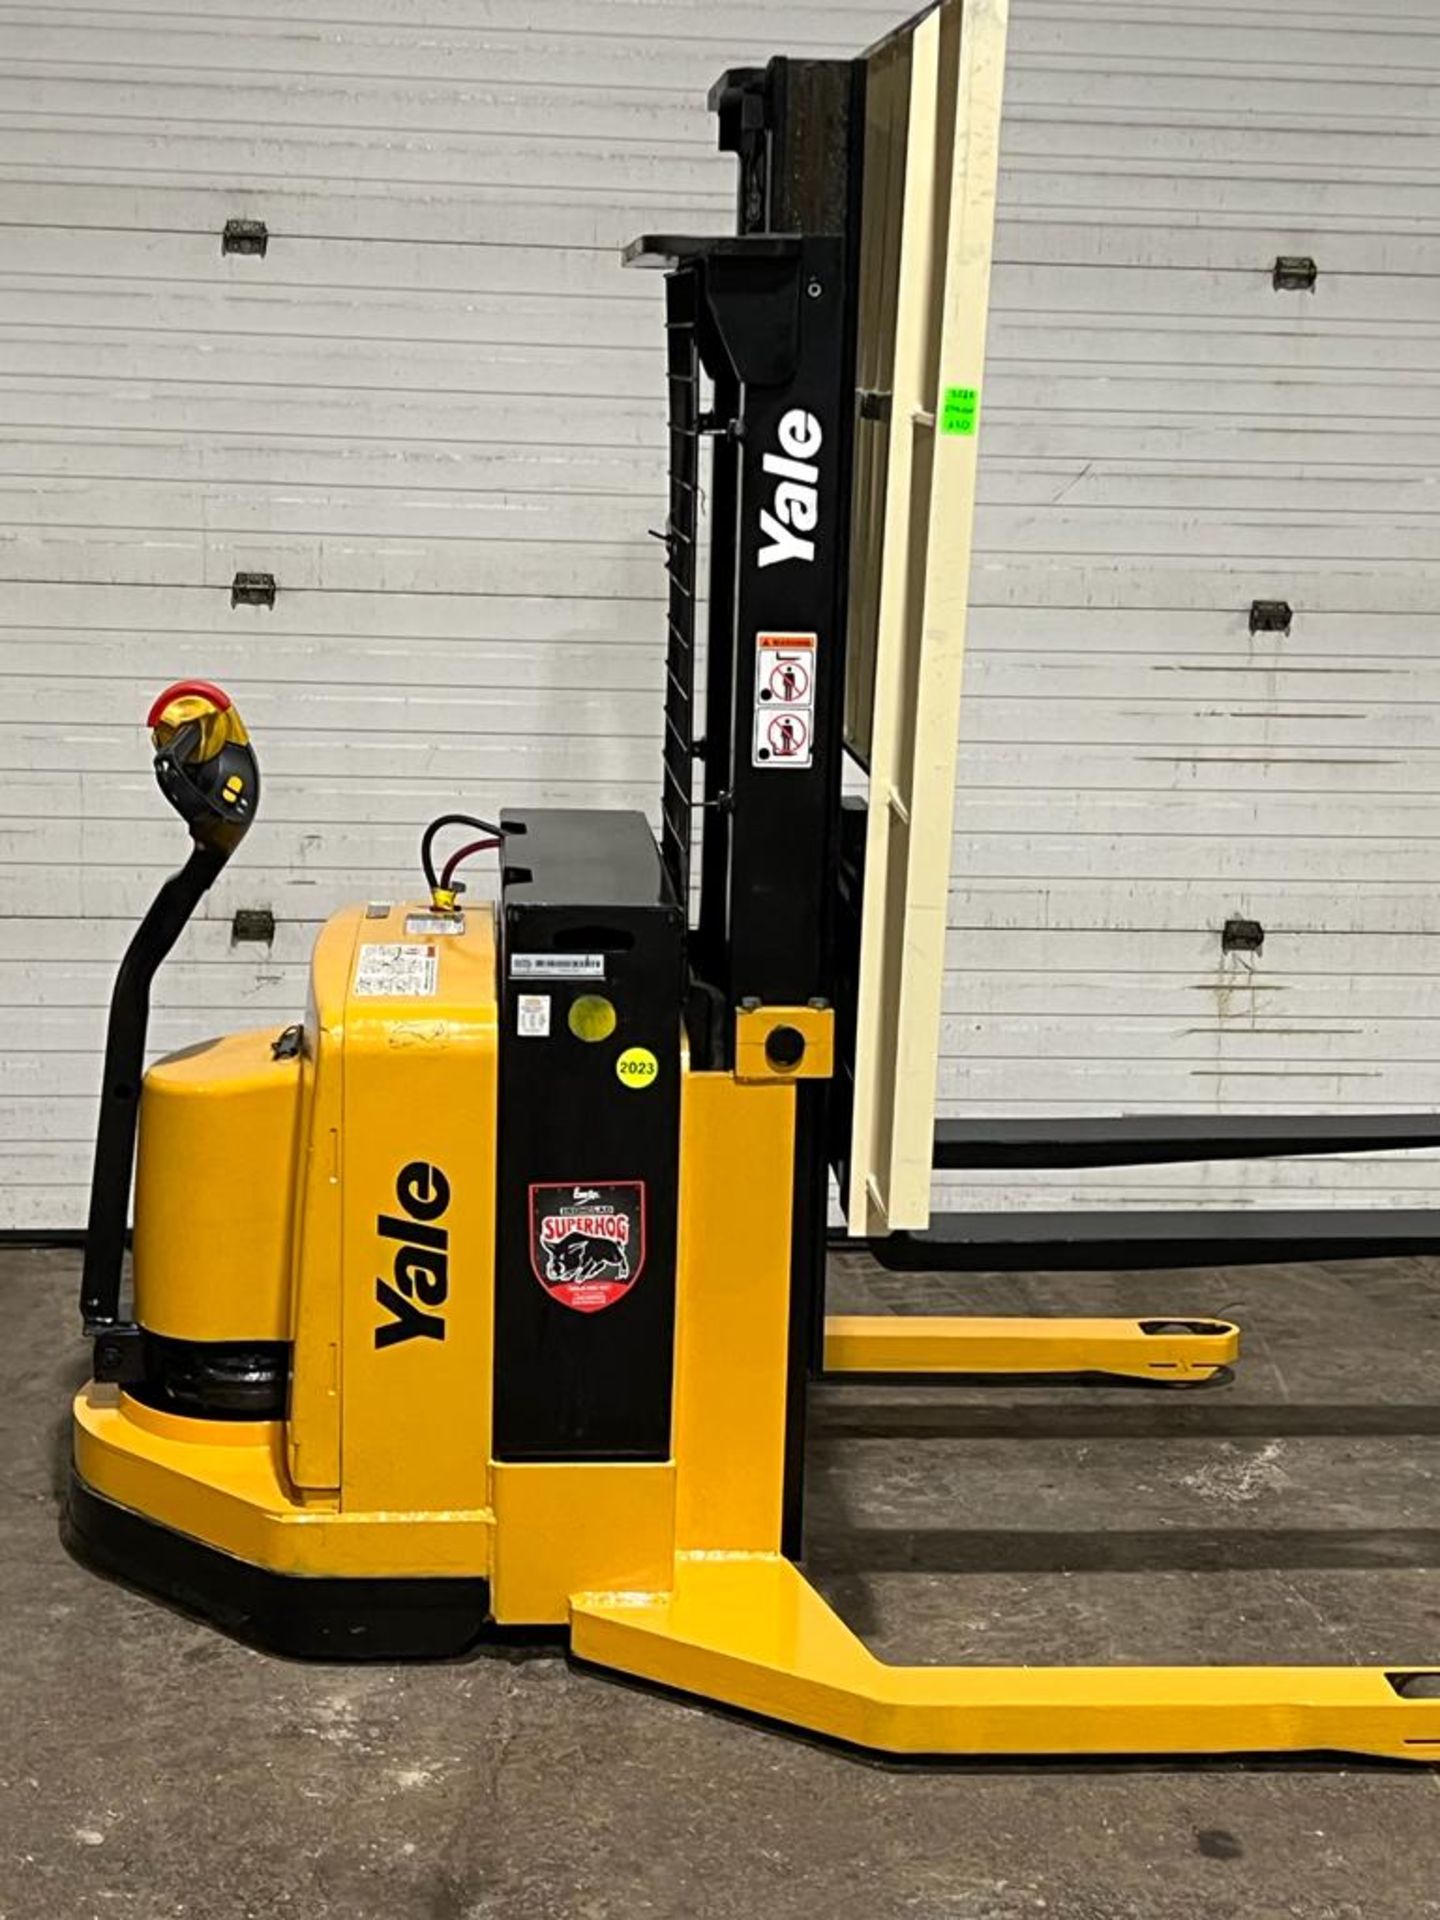 2012 Yale Pallet Stacker Walk Behind 4,000lbs capacity electric Powered Pallet Cart 24V with Low